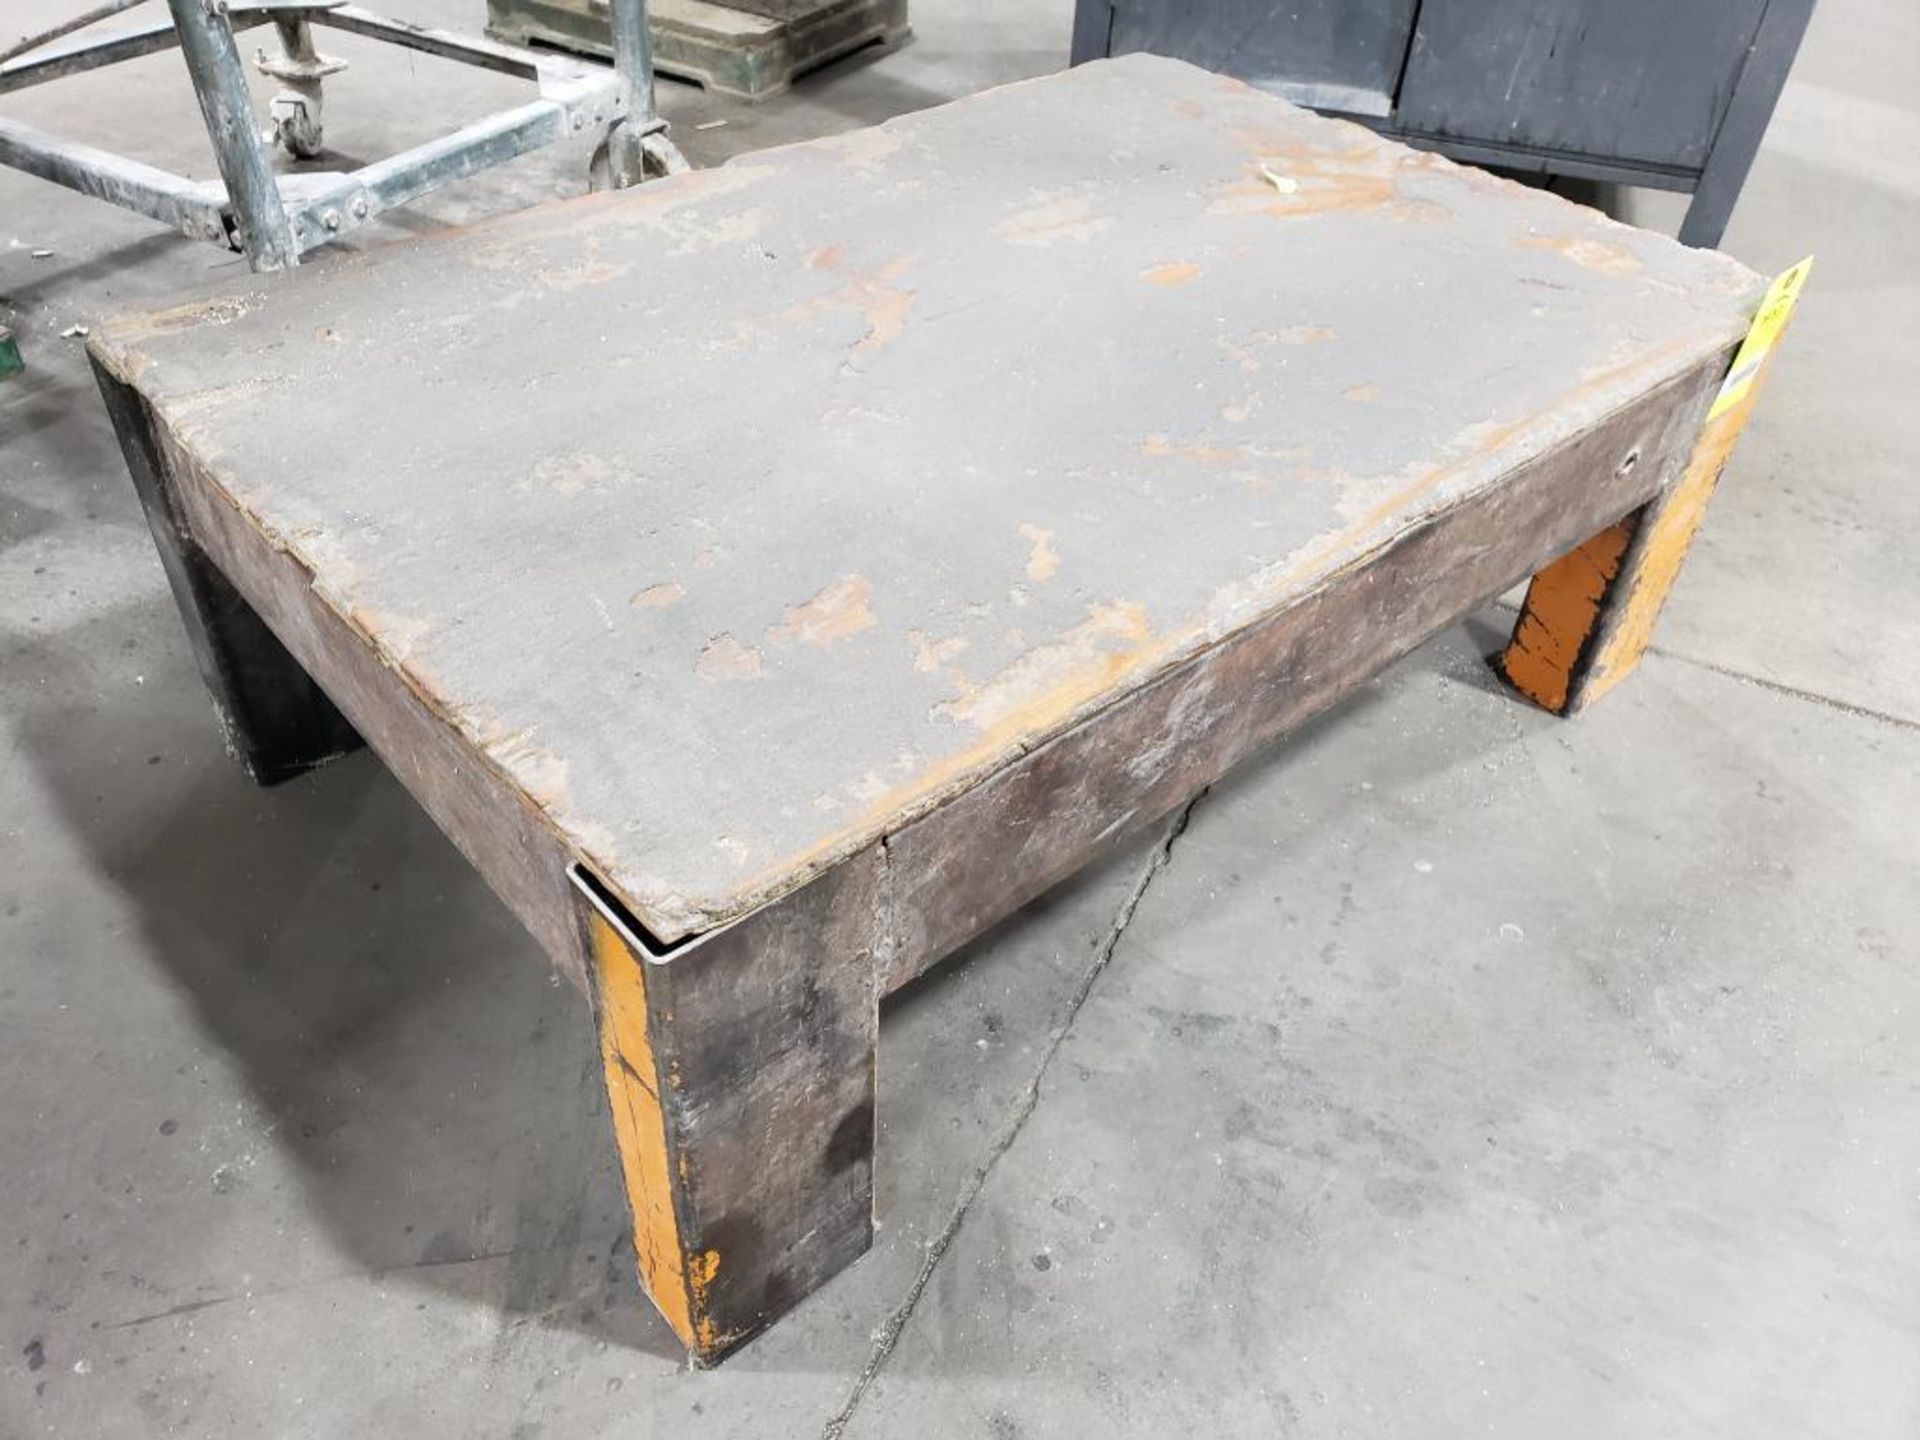 Steel shop platfrom. (wood top) - Image 2 of 3